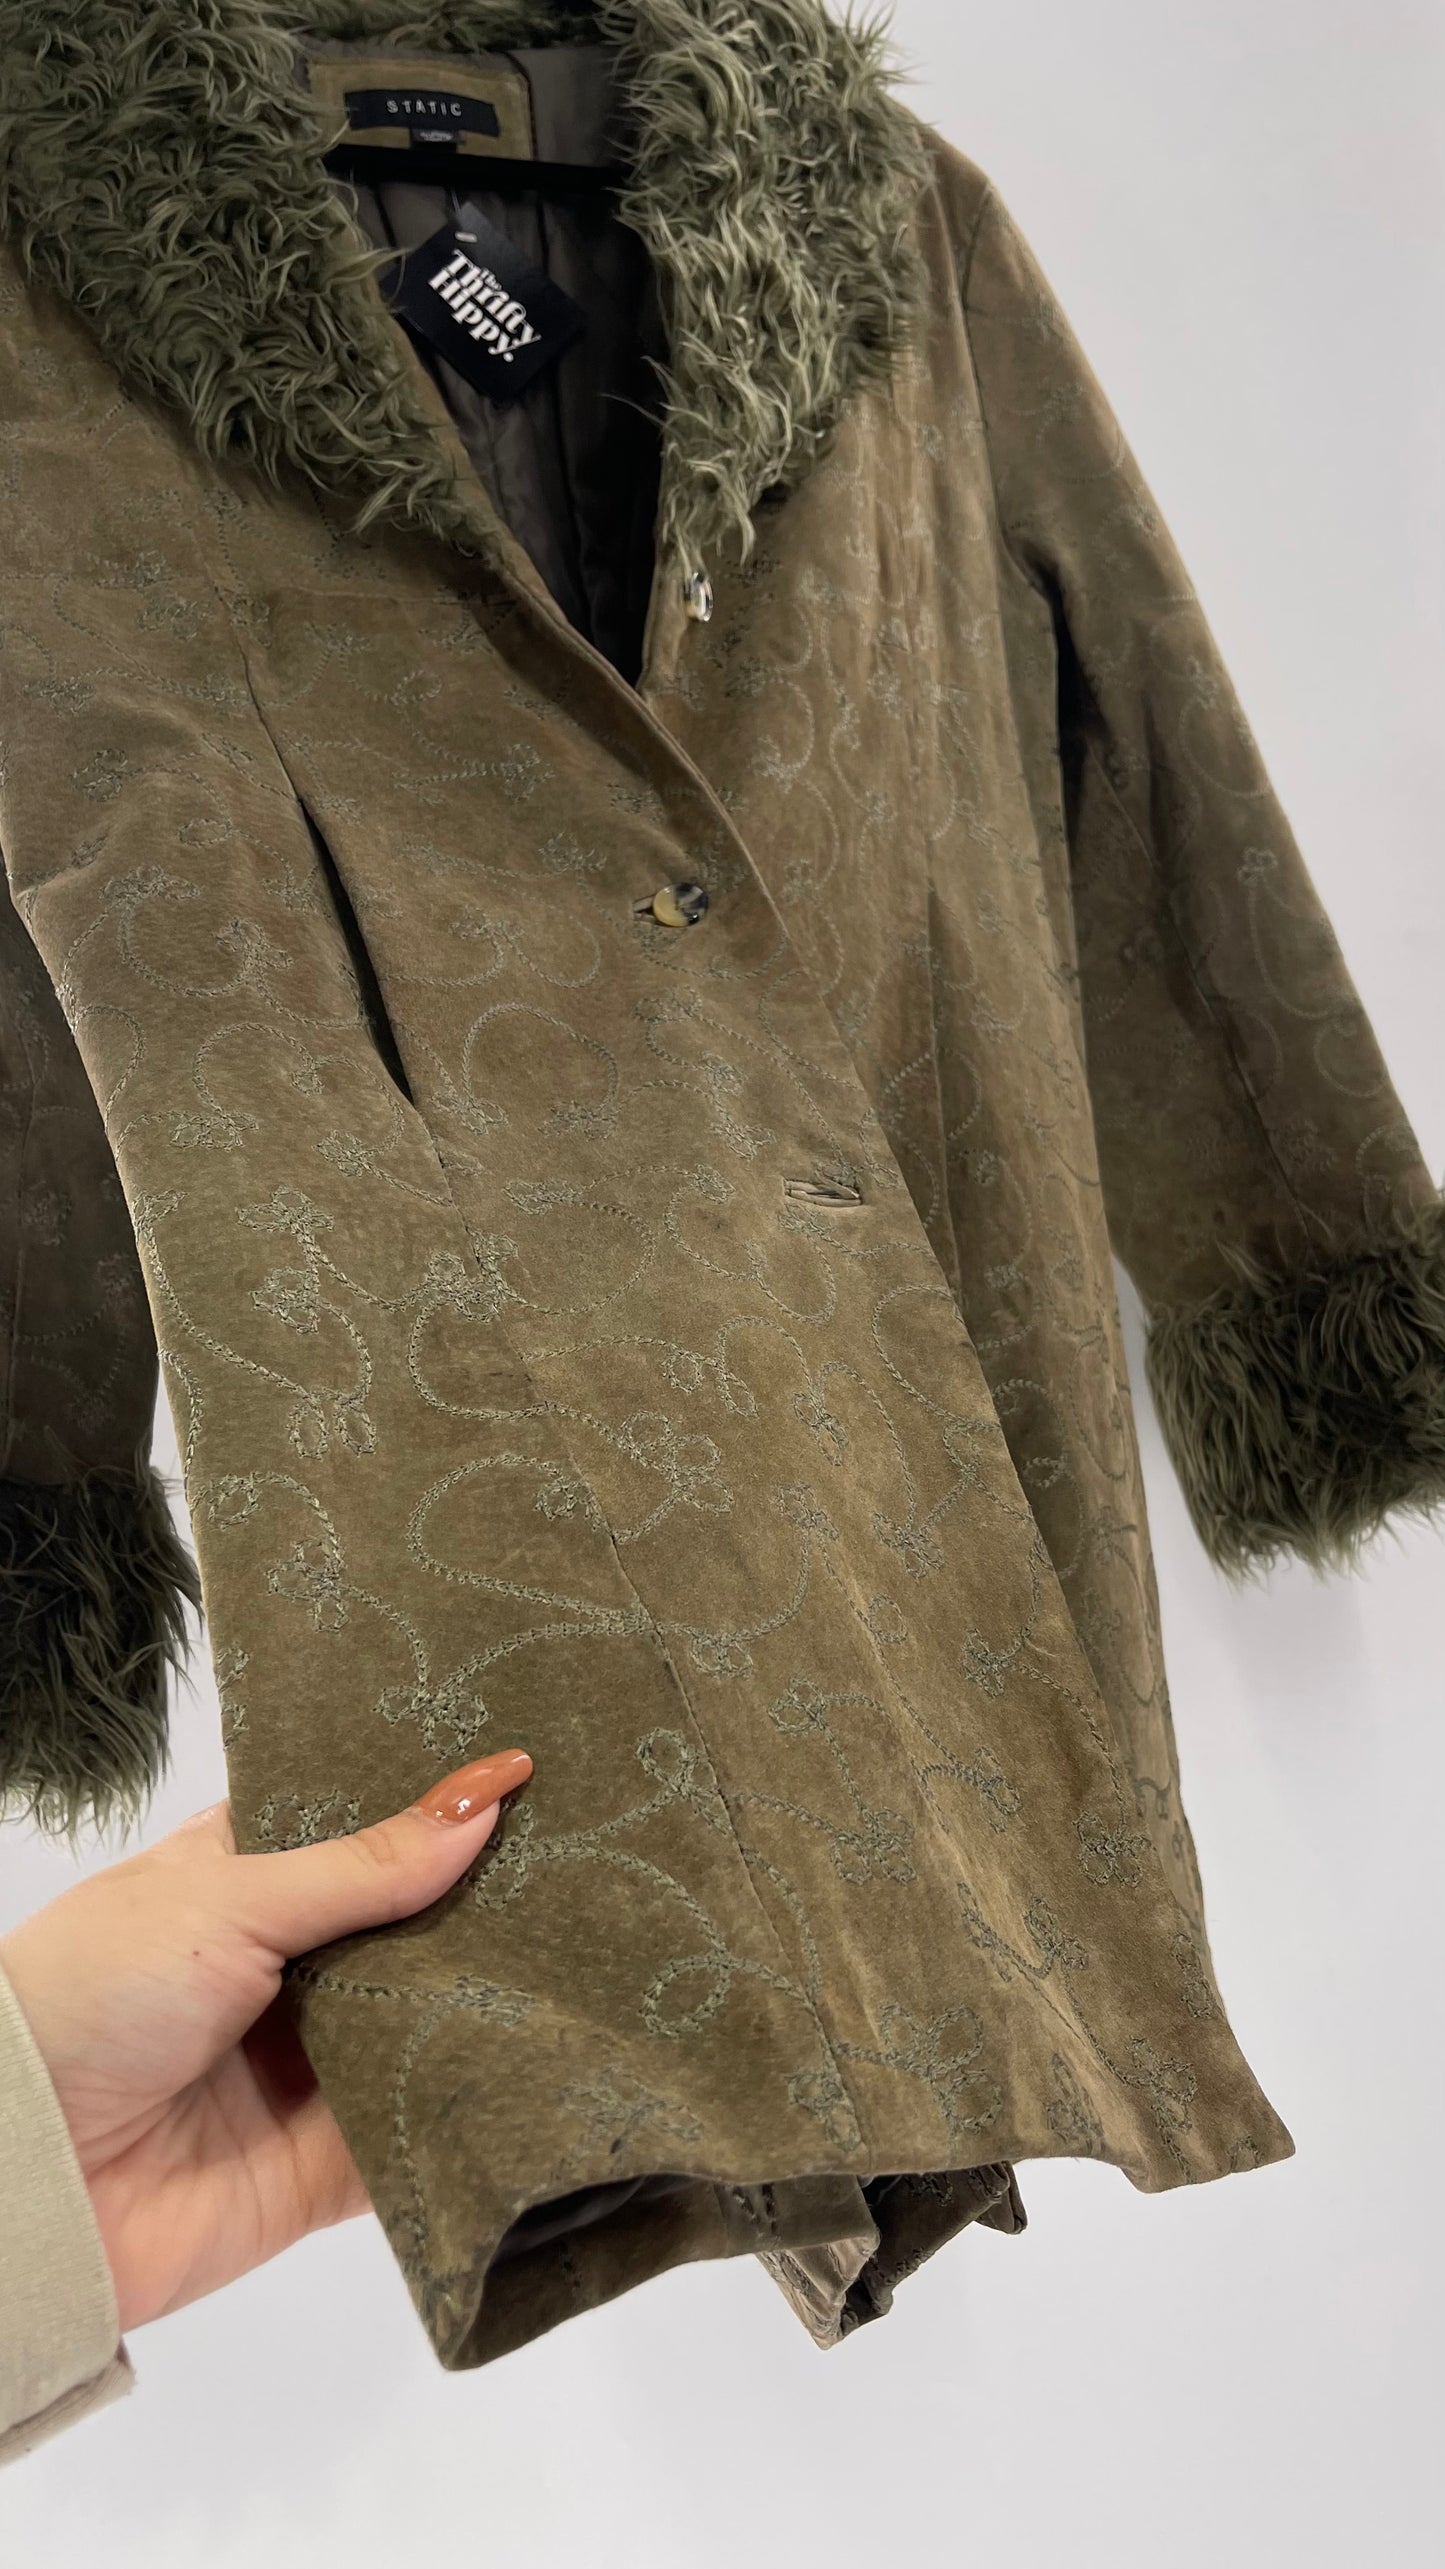 Vintage STATIC Embroidered Genuine Leather Coat with Fur Cuffs and Collar (C) (XL)